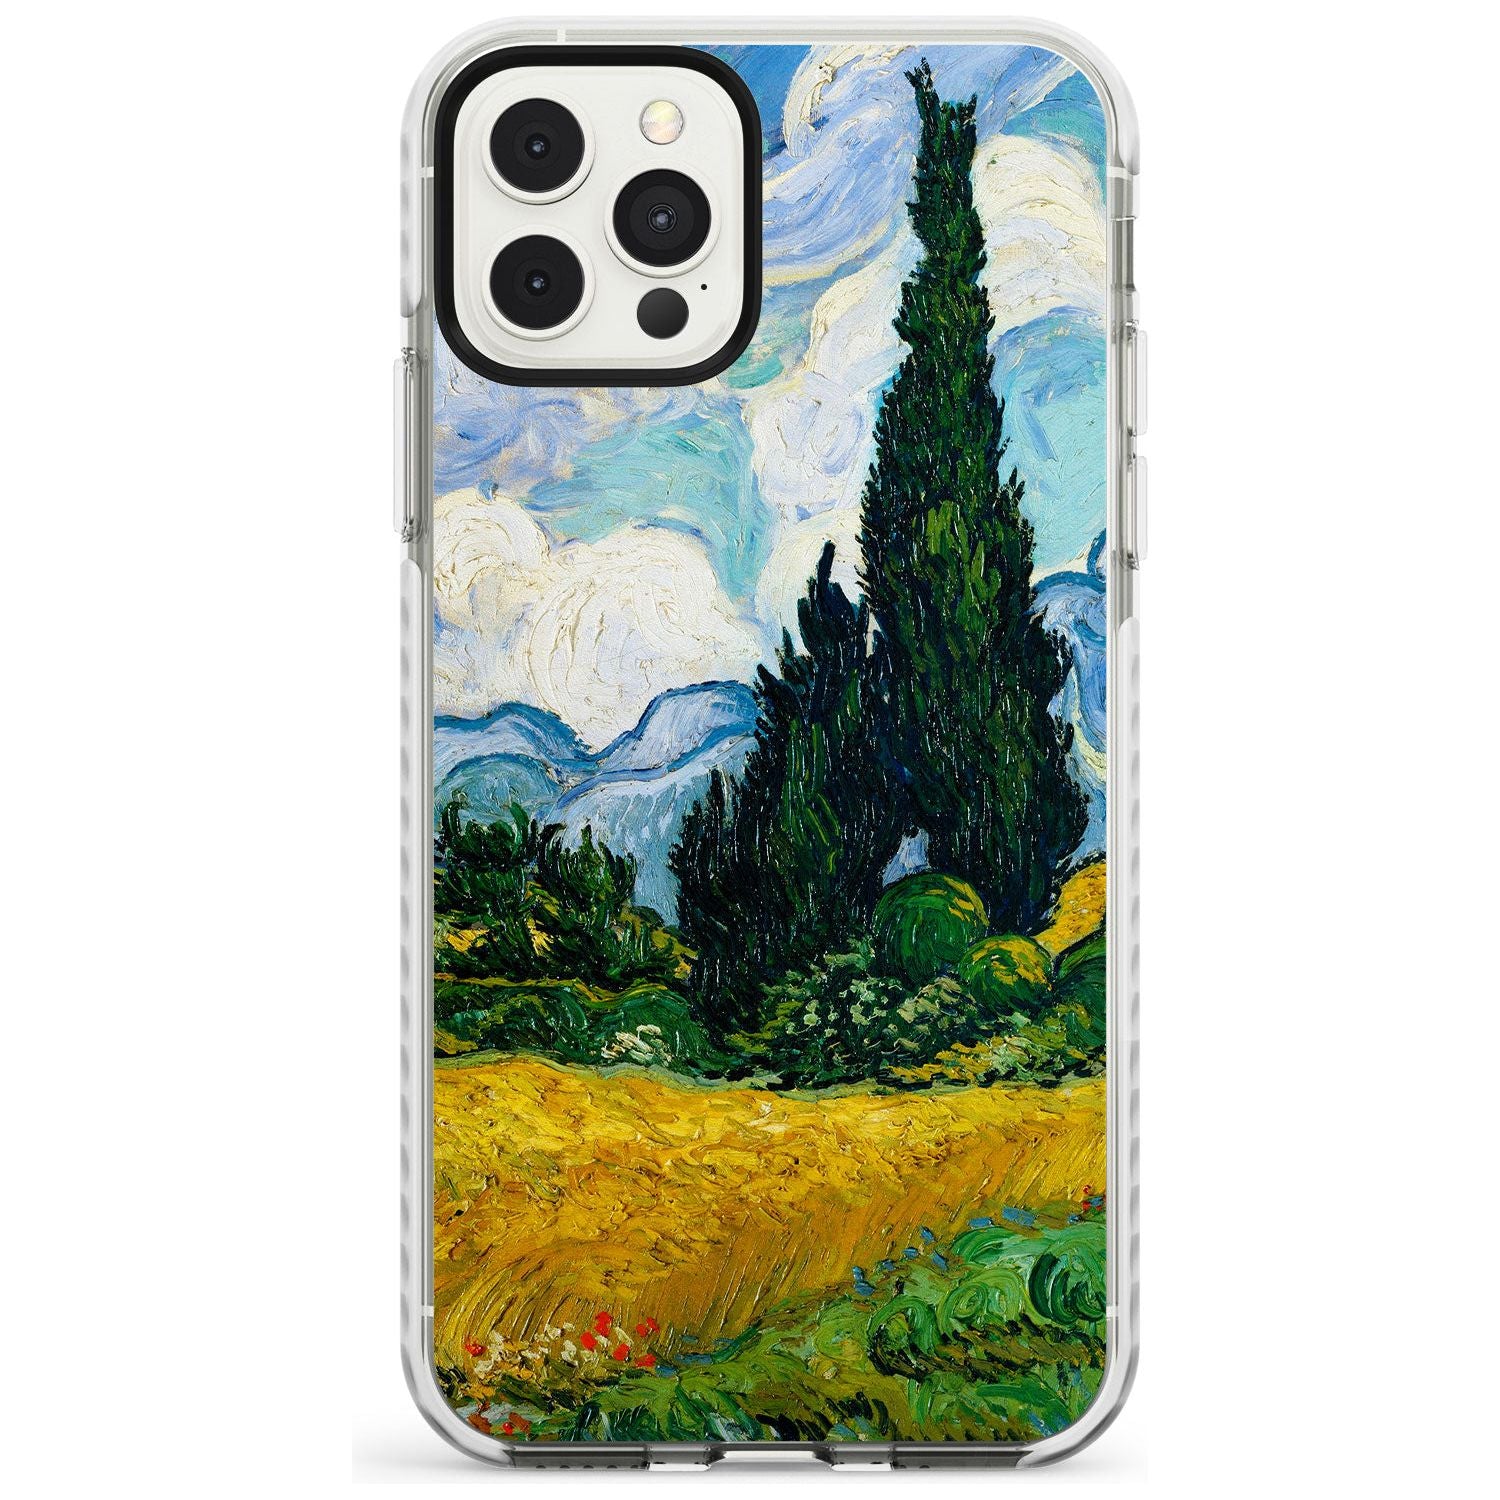 Wheat Field with Cypresses by Vincent Van Gogh Slim TPU Phone Case for iPhone 11 Pro Max